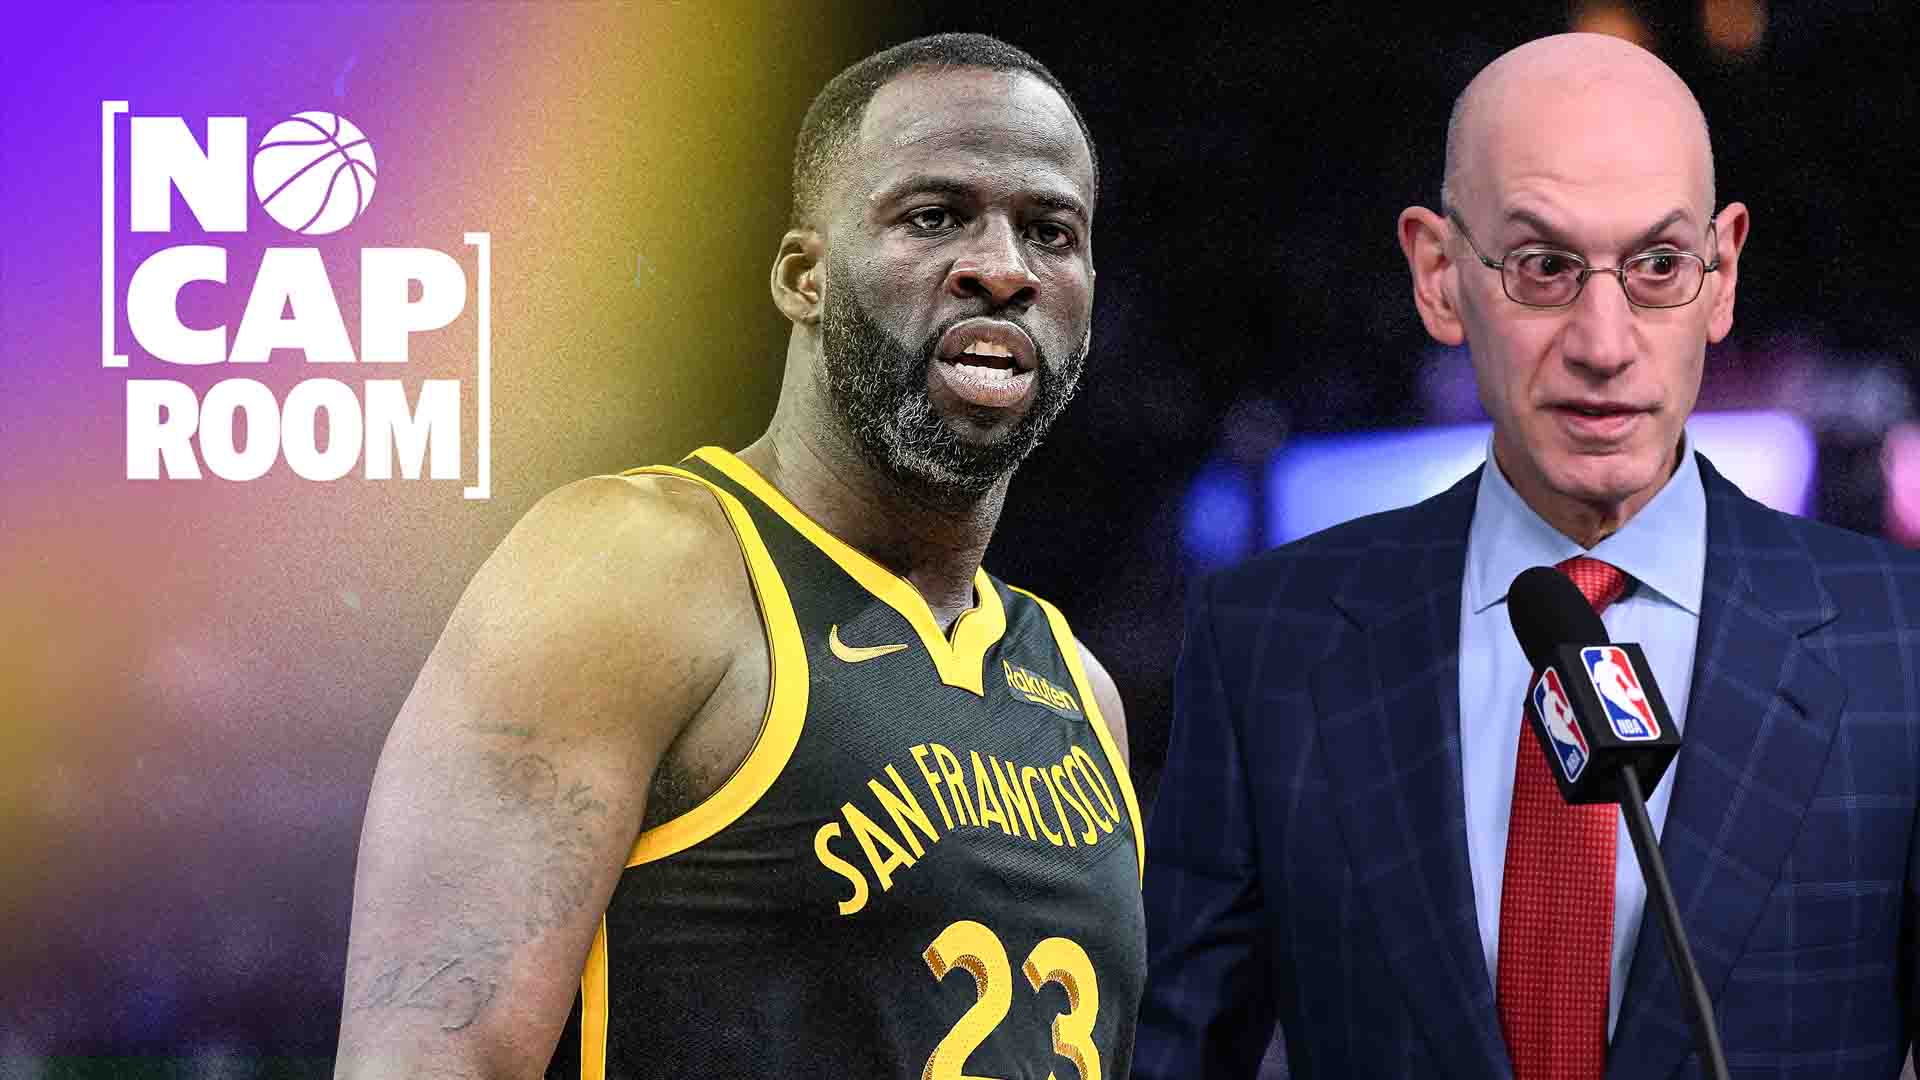 Does Draymond Green’s indefinite suspension give the NBA flexibility or is it a power grab? | No Cap Room